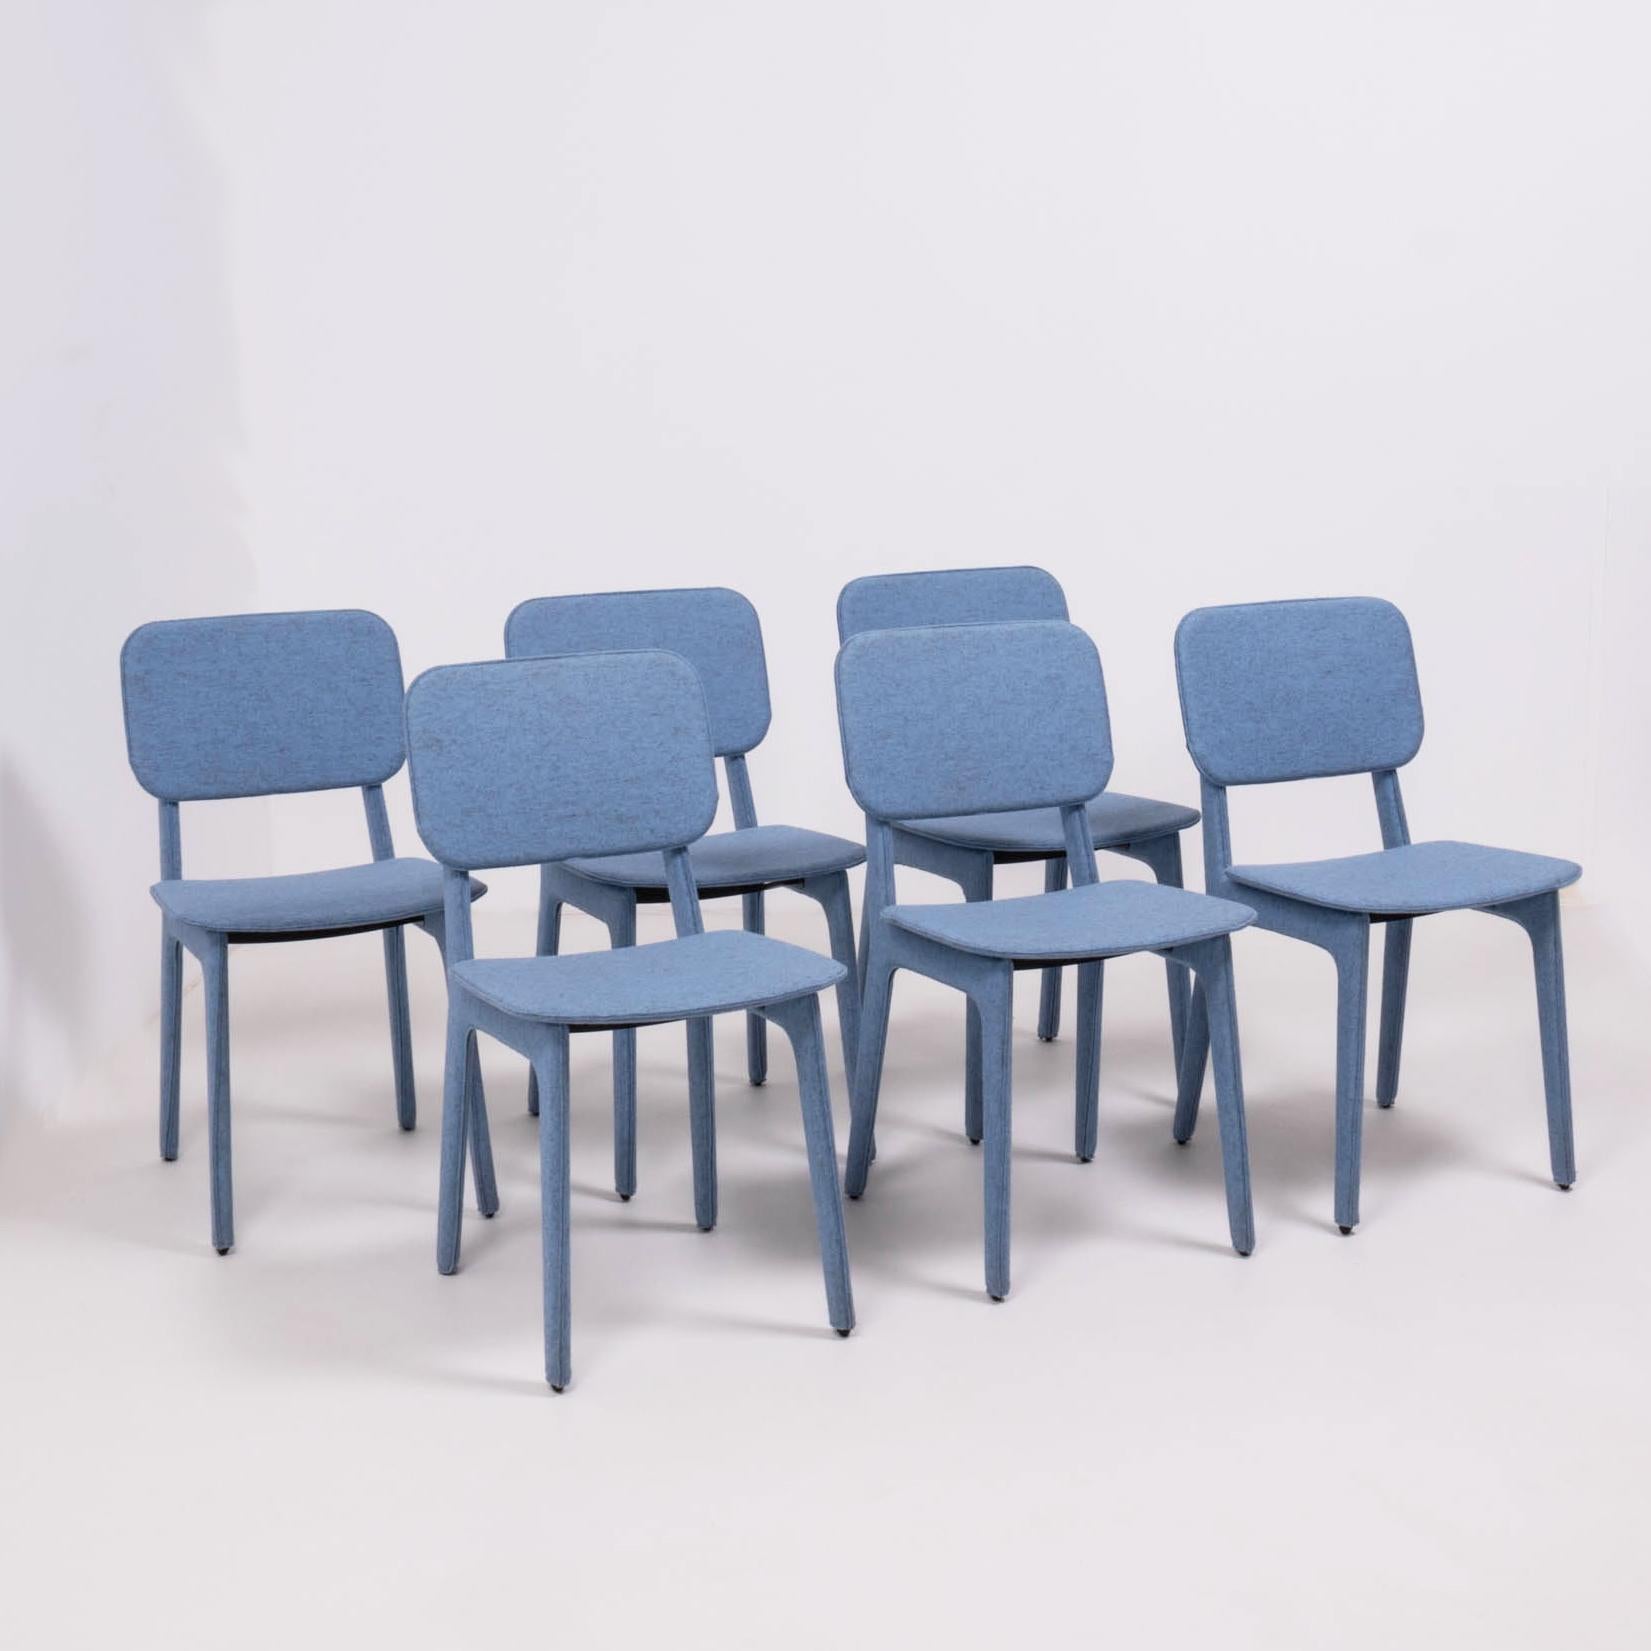 Designed by Delo Lindo for Ligne Roset in 2012, the blue felt chair combines comfort and simplicity.

Constructed from molded beech ply with steel base profiles, the chairs have 
Foam seat pads and are completely upholstered in blue wool felt.

The